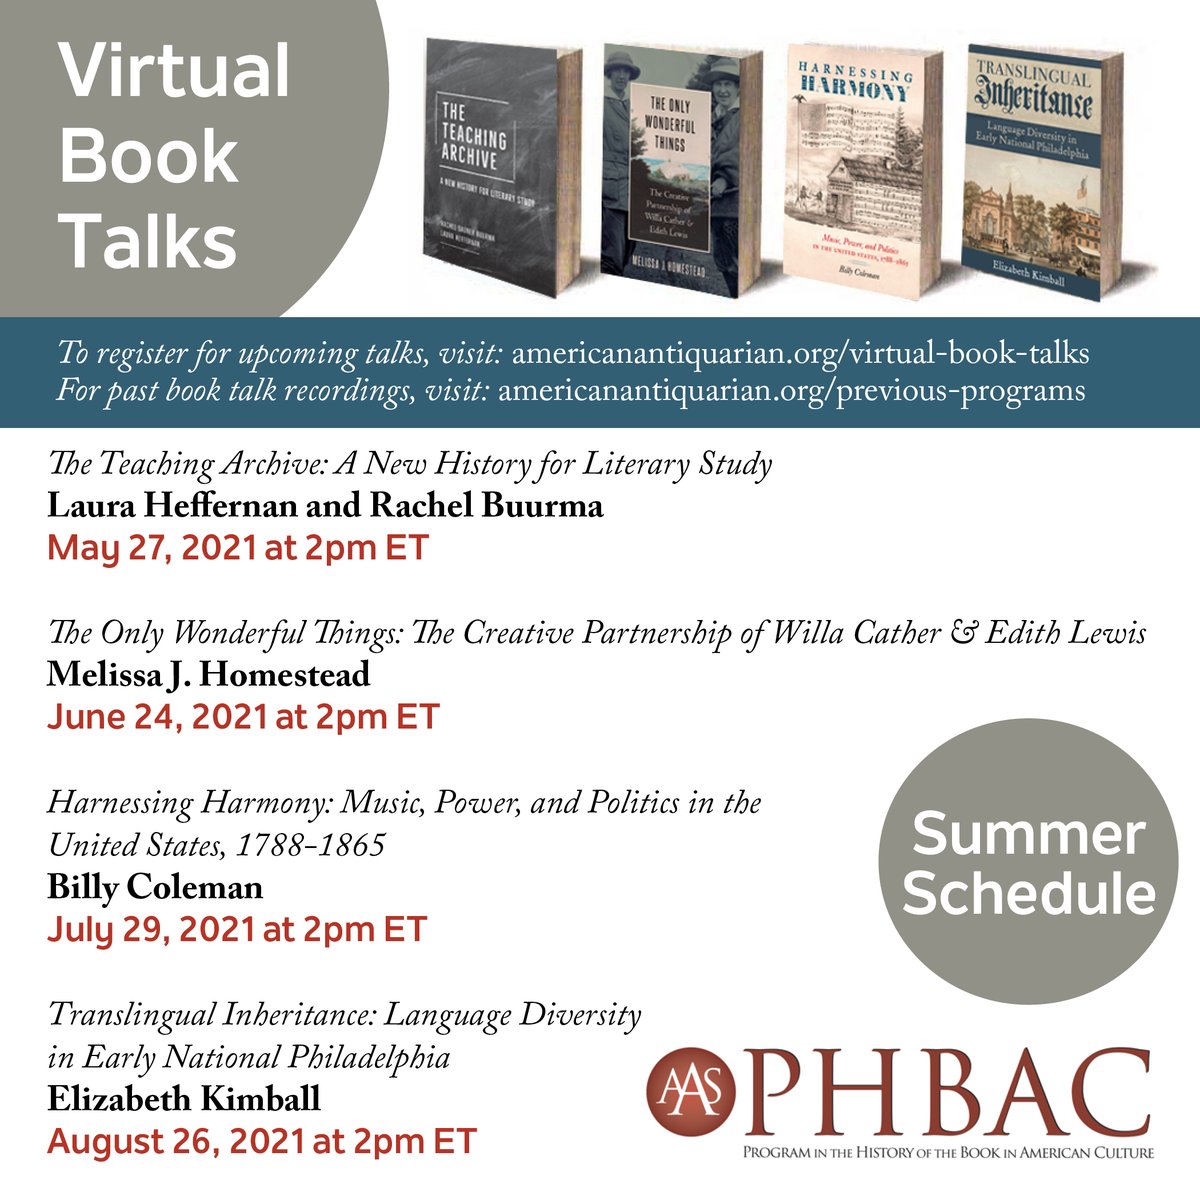 Pleased to share the Summer 2021 season of the #PHBAC Virtual Book Talks @AmAntiquarian.  #bookhistory

More information can be found at americanantiquarian.org/virtual-book-t…